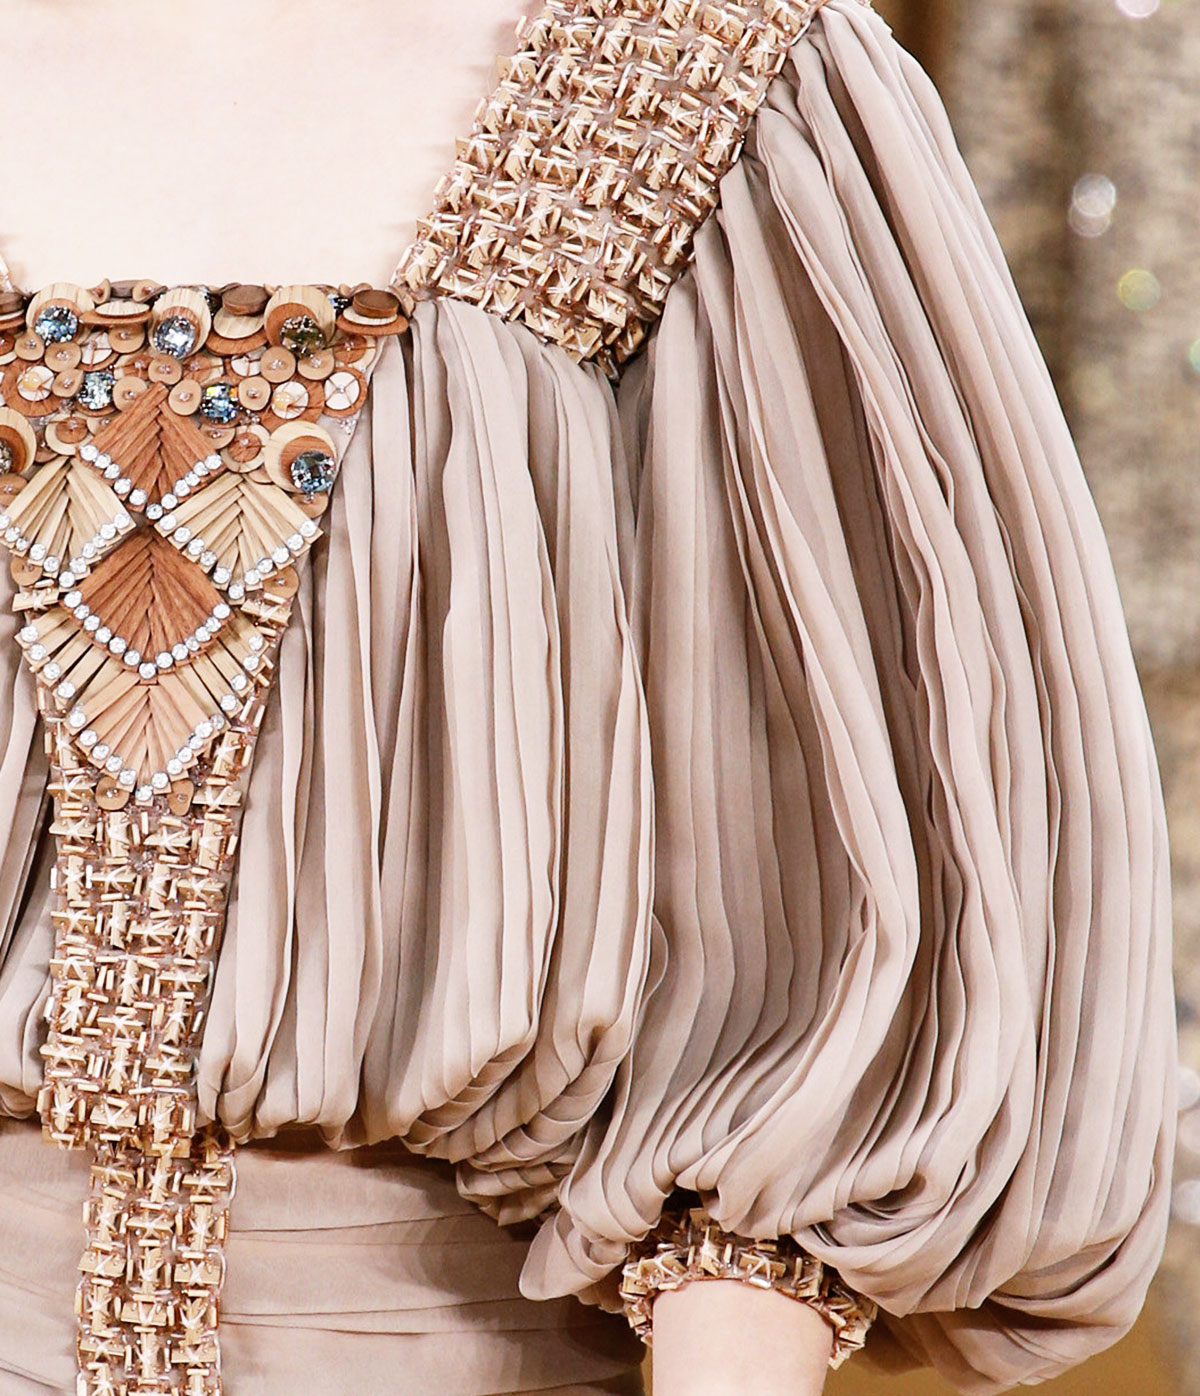 Chanel Spring 2016 Haute Couture wood seqiuins